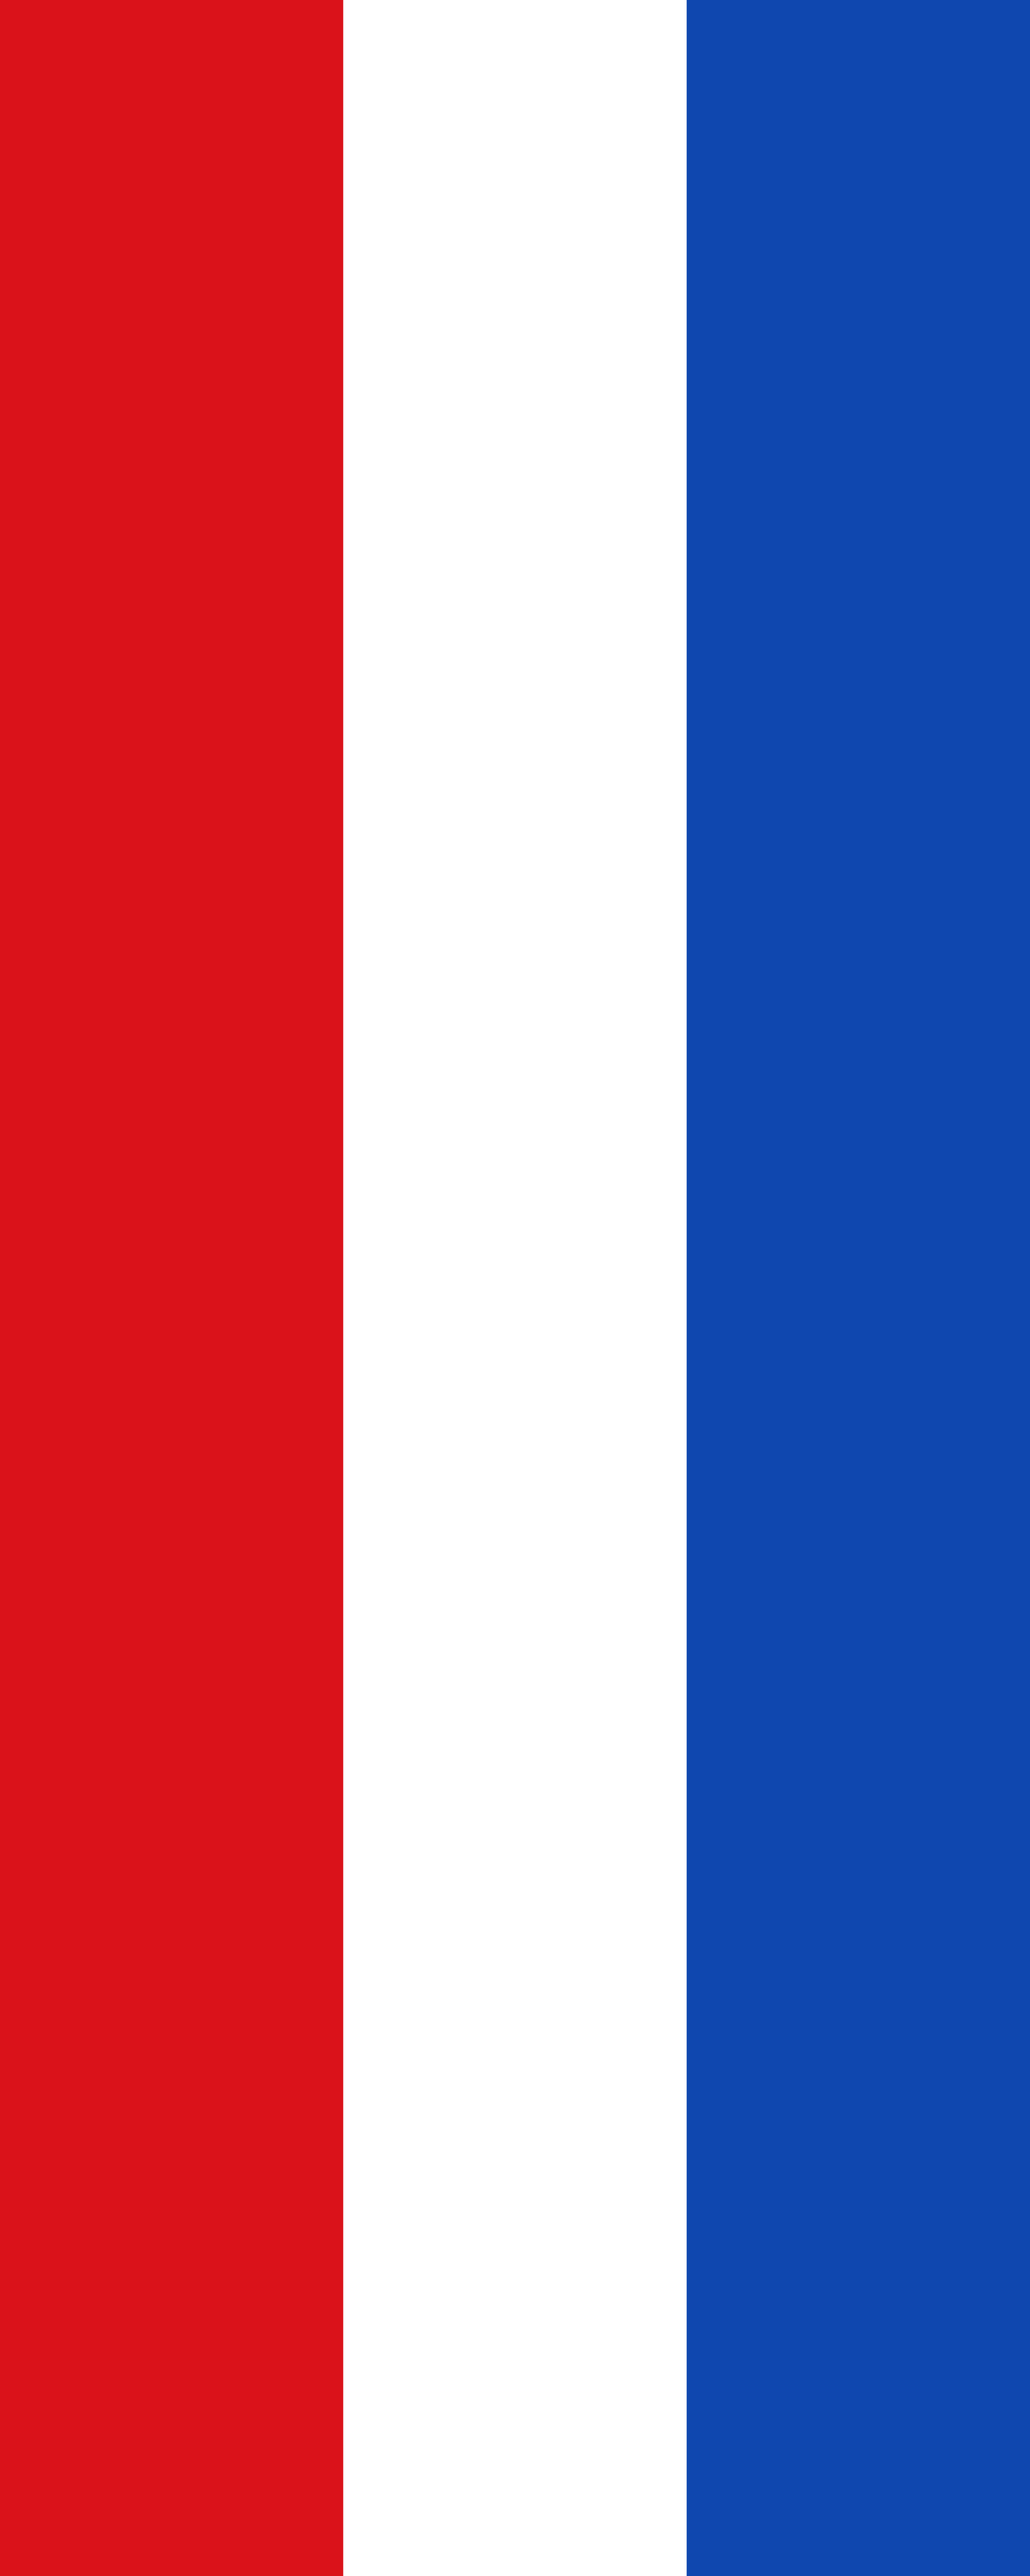 File:Flag red white blue 2x5.svg - Wikimedia Commons